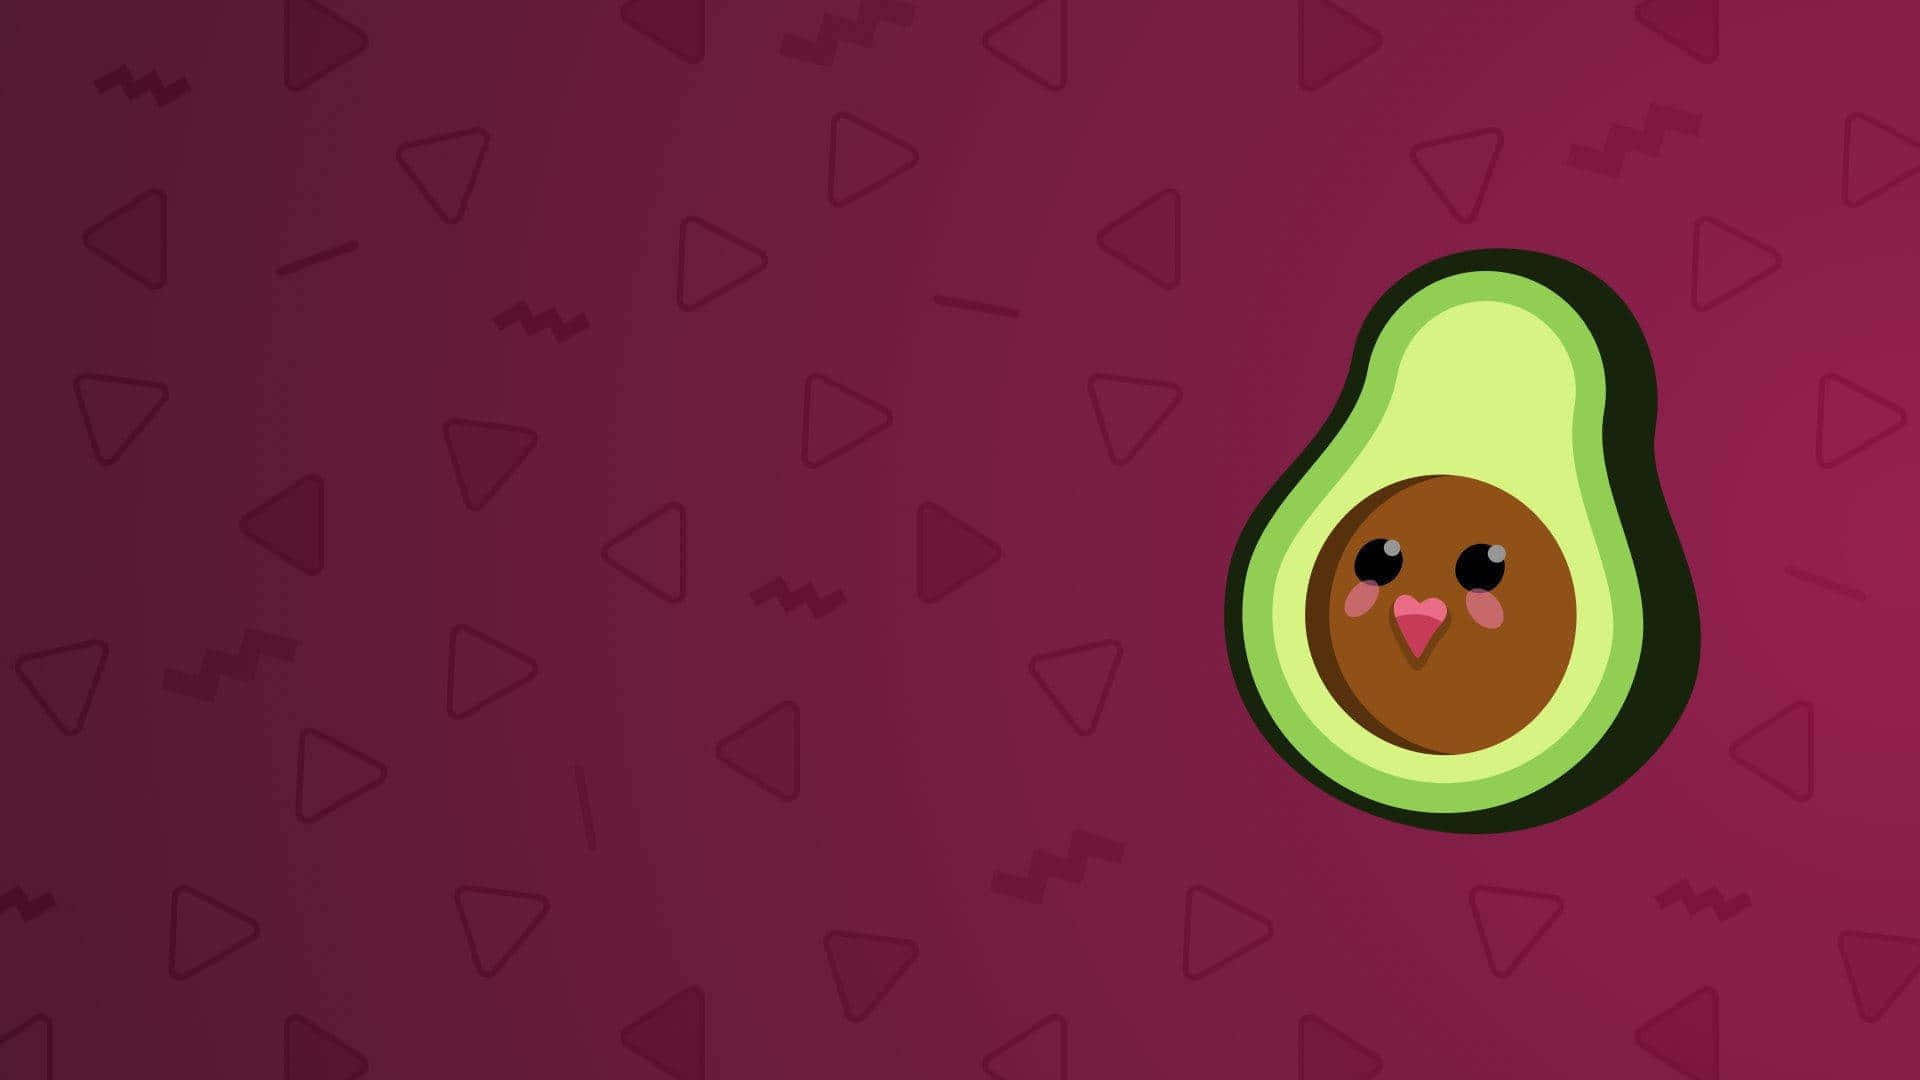 Adorable Avocado Friends on a Vibrant Background